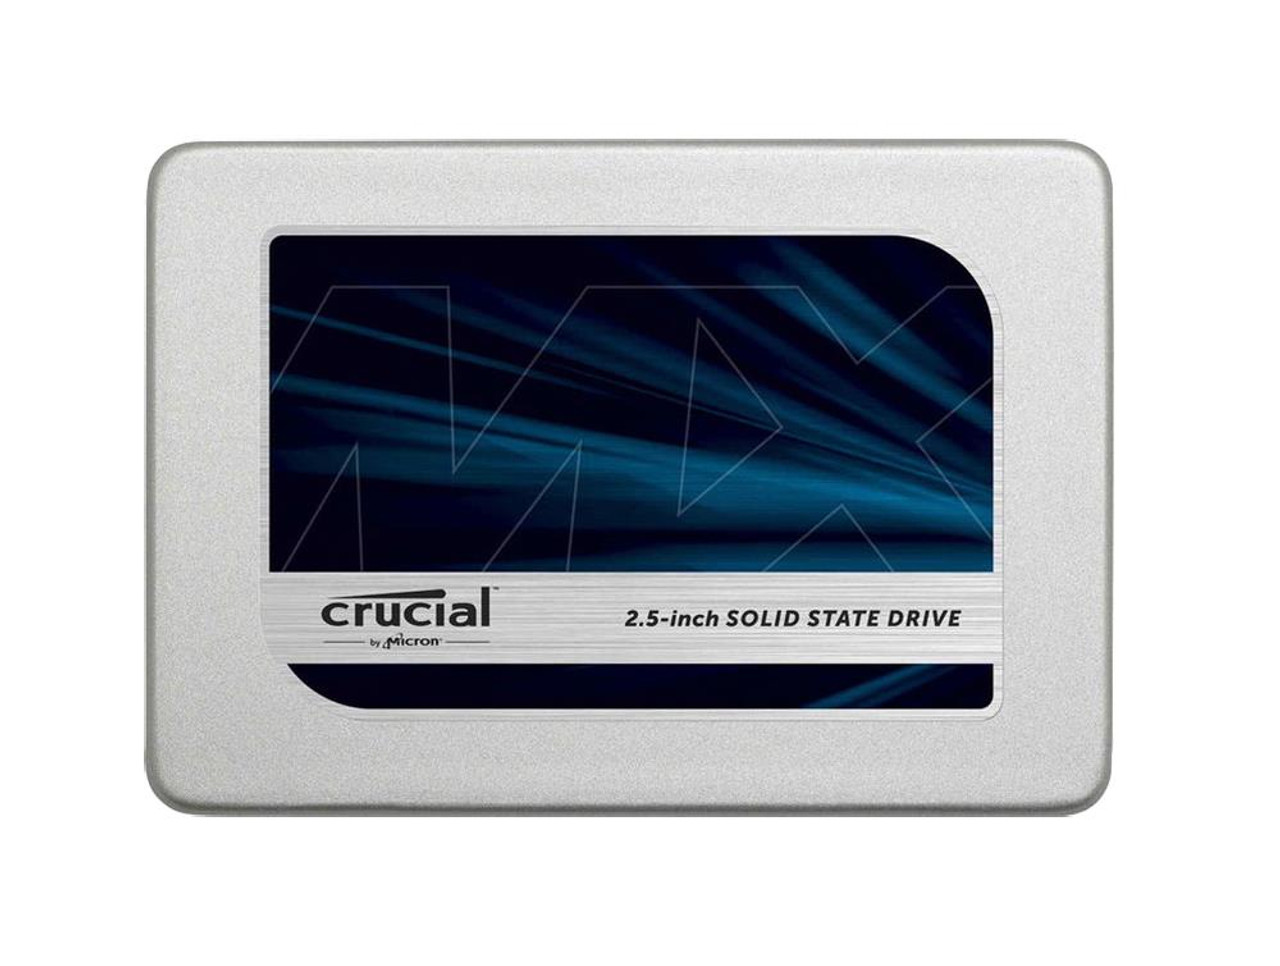 CT8682888 Crucial MX300 Series 2TB TLC SATA 6Gbps (AES-256) 2.5-inch Internal Solid State Drive (SSD) with 9.5mm Adapter for Gigabyte GA-965P-DS4